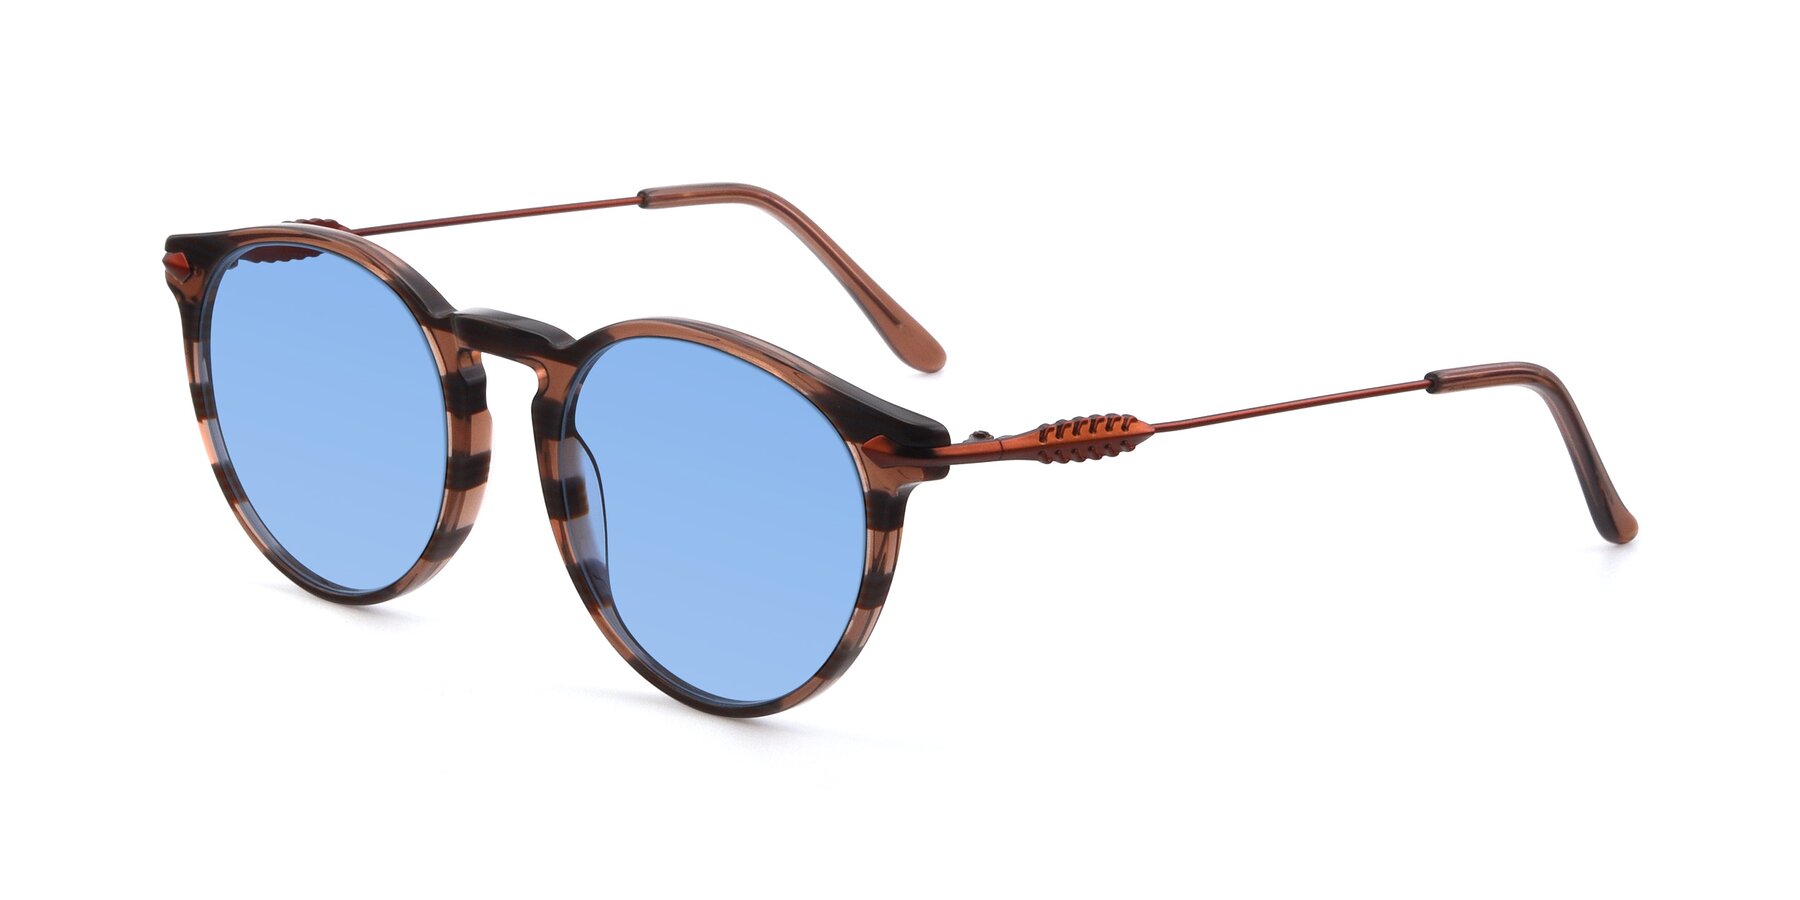 Angle of 17660 in Stripe Brown with Medium Blue Tinted Lenses